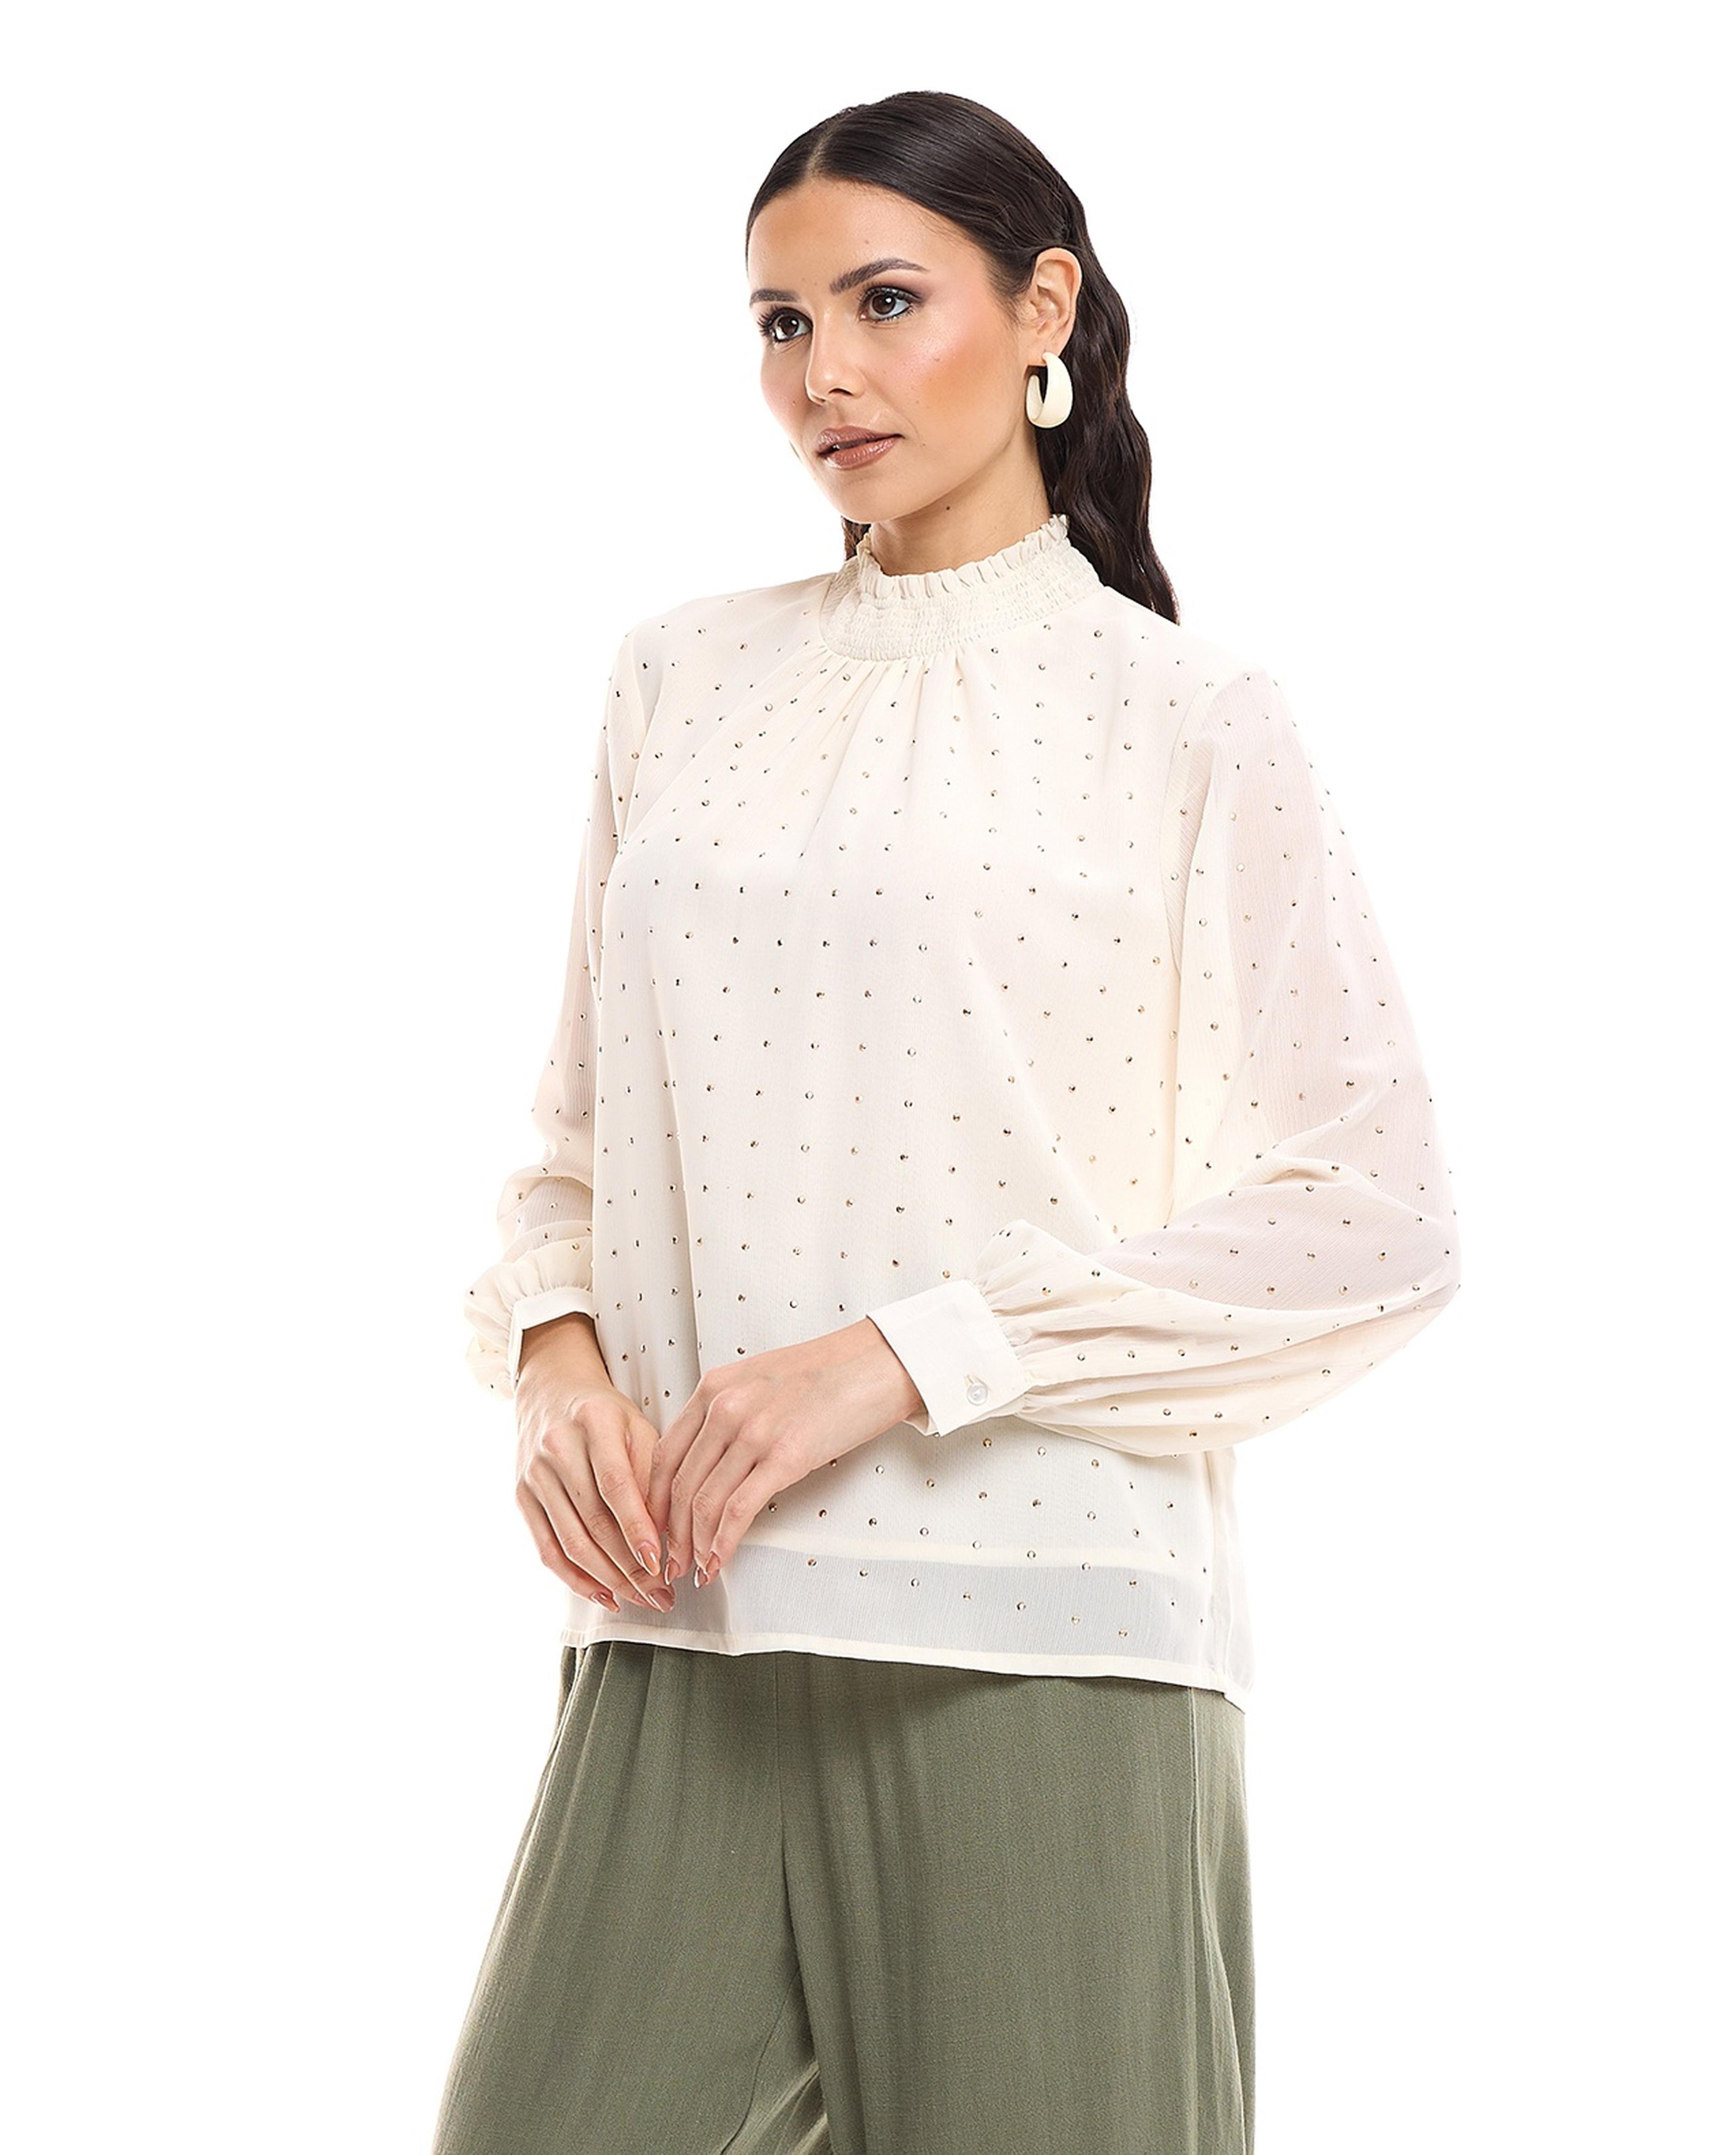 Studded Top with Mock Neck and Bishop Sleeves